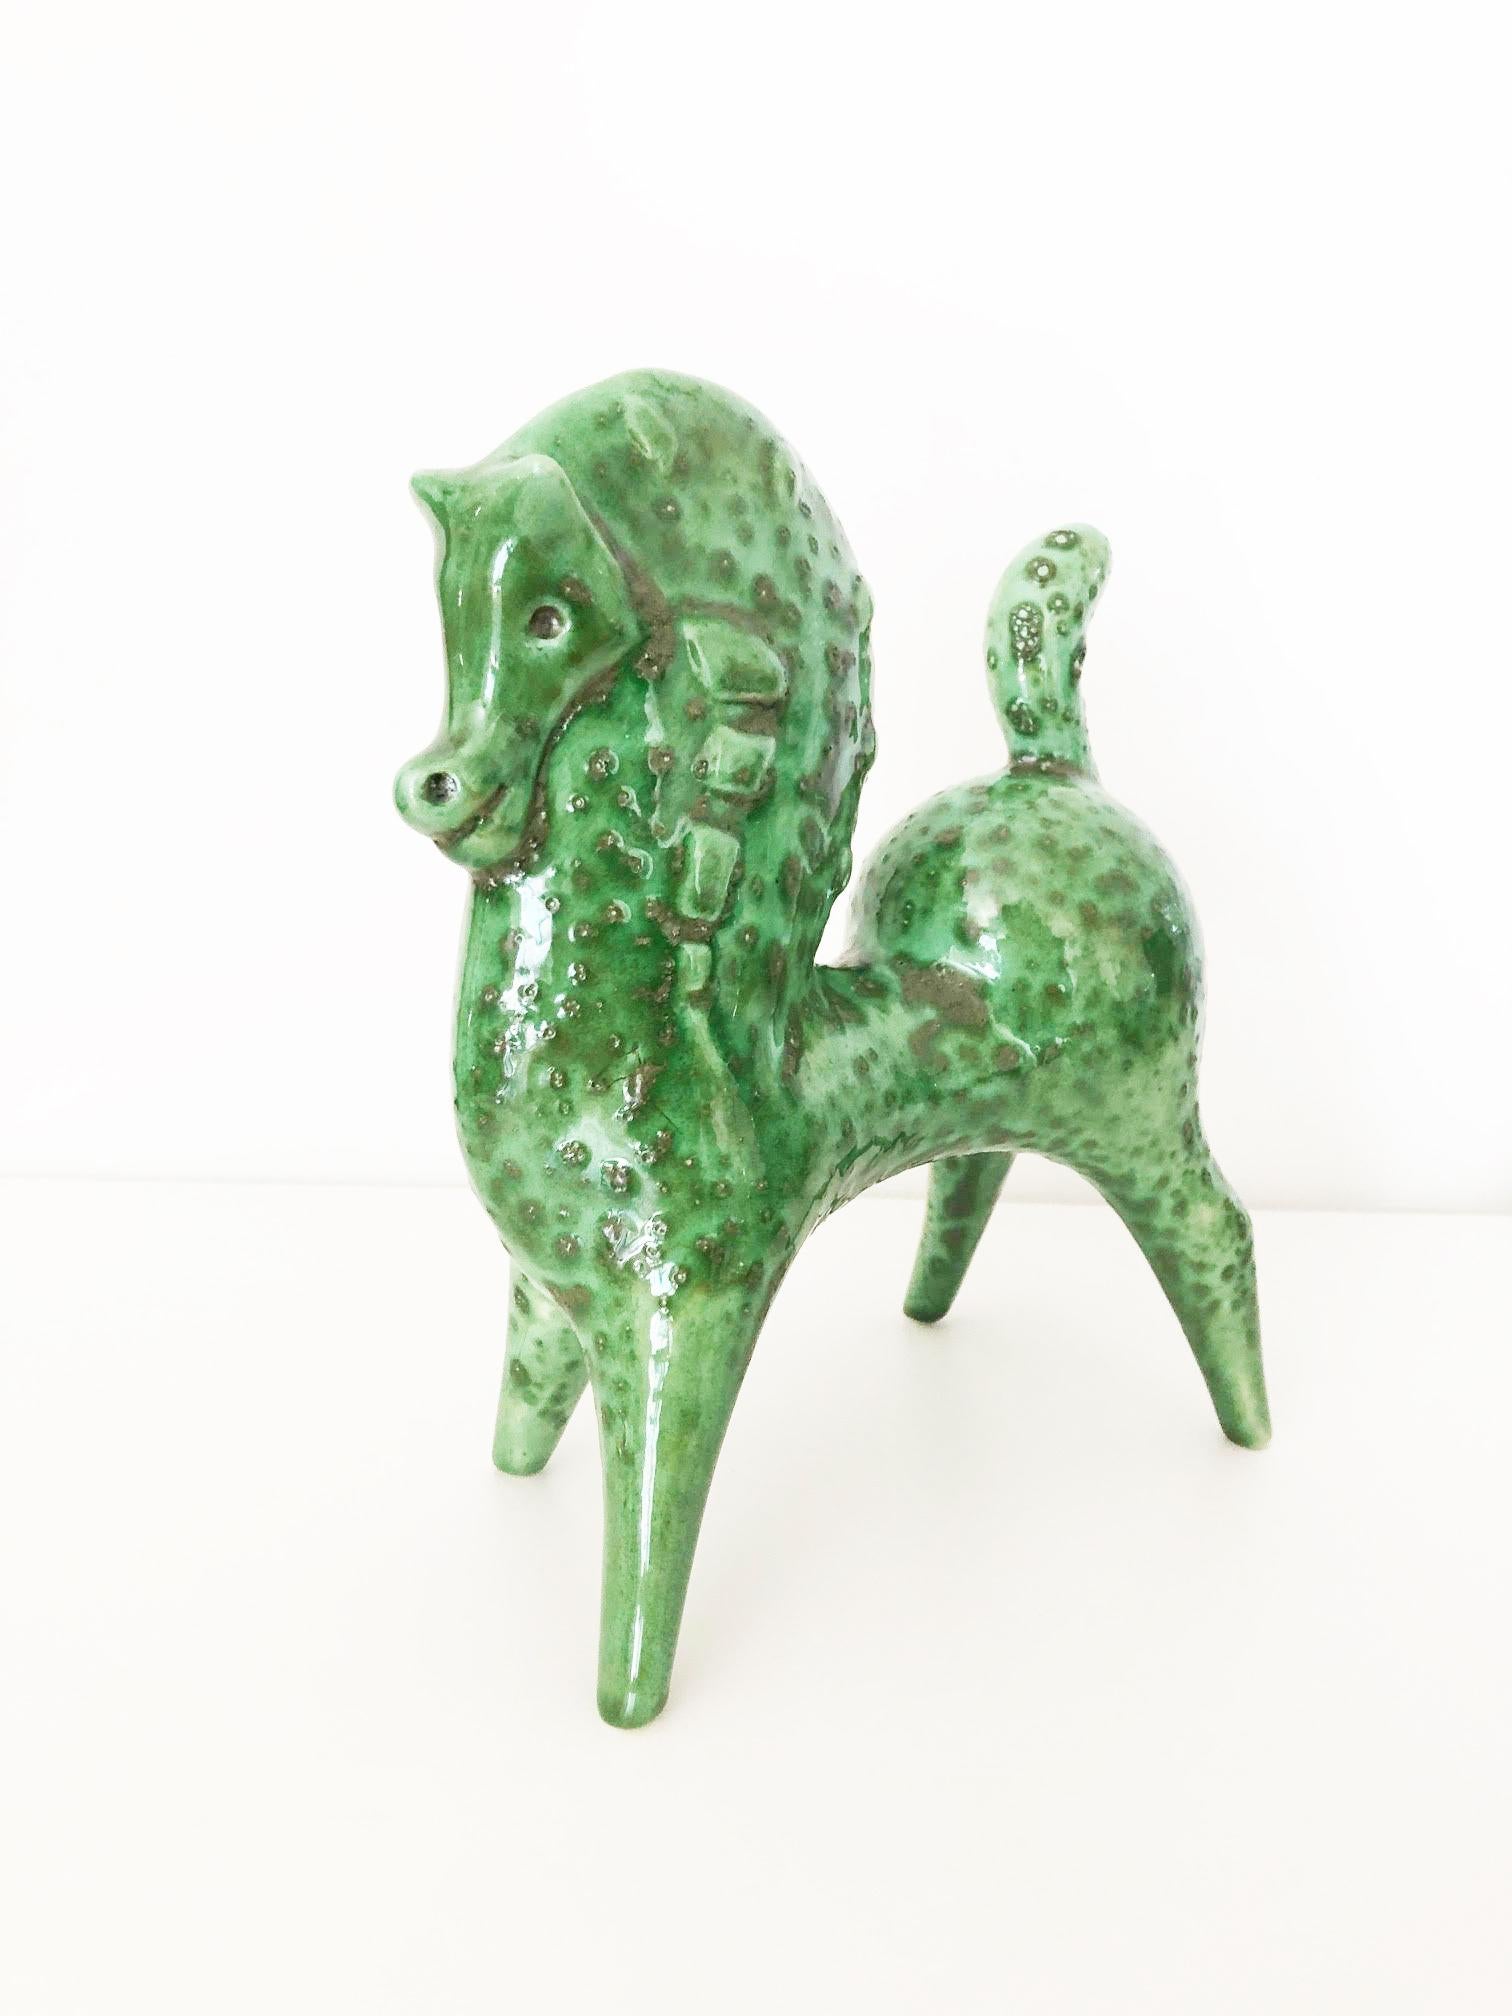 Horse of Roberto Rigon Made in Italy - Art -

Year: 1950

Materials: Signed and glazed ceramic, Green

Conditions: Perfect

Measurements: Cm 30 x cm 20.

